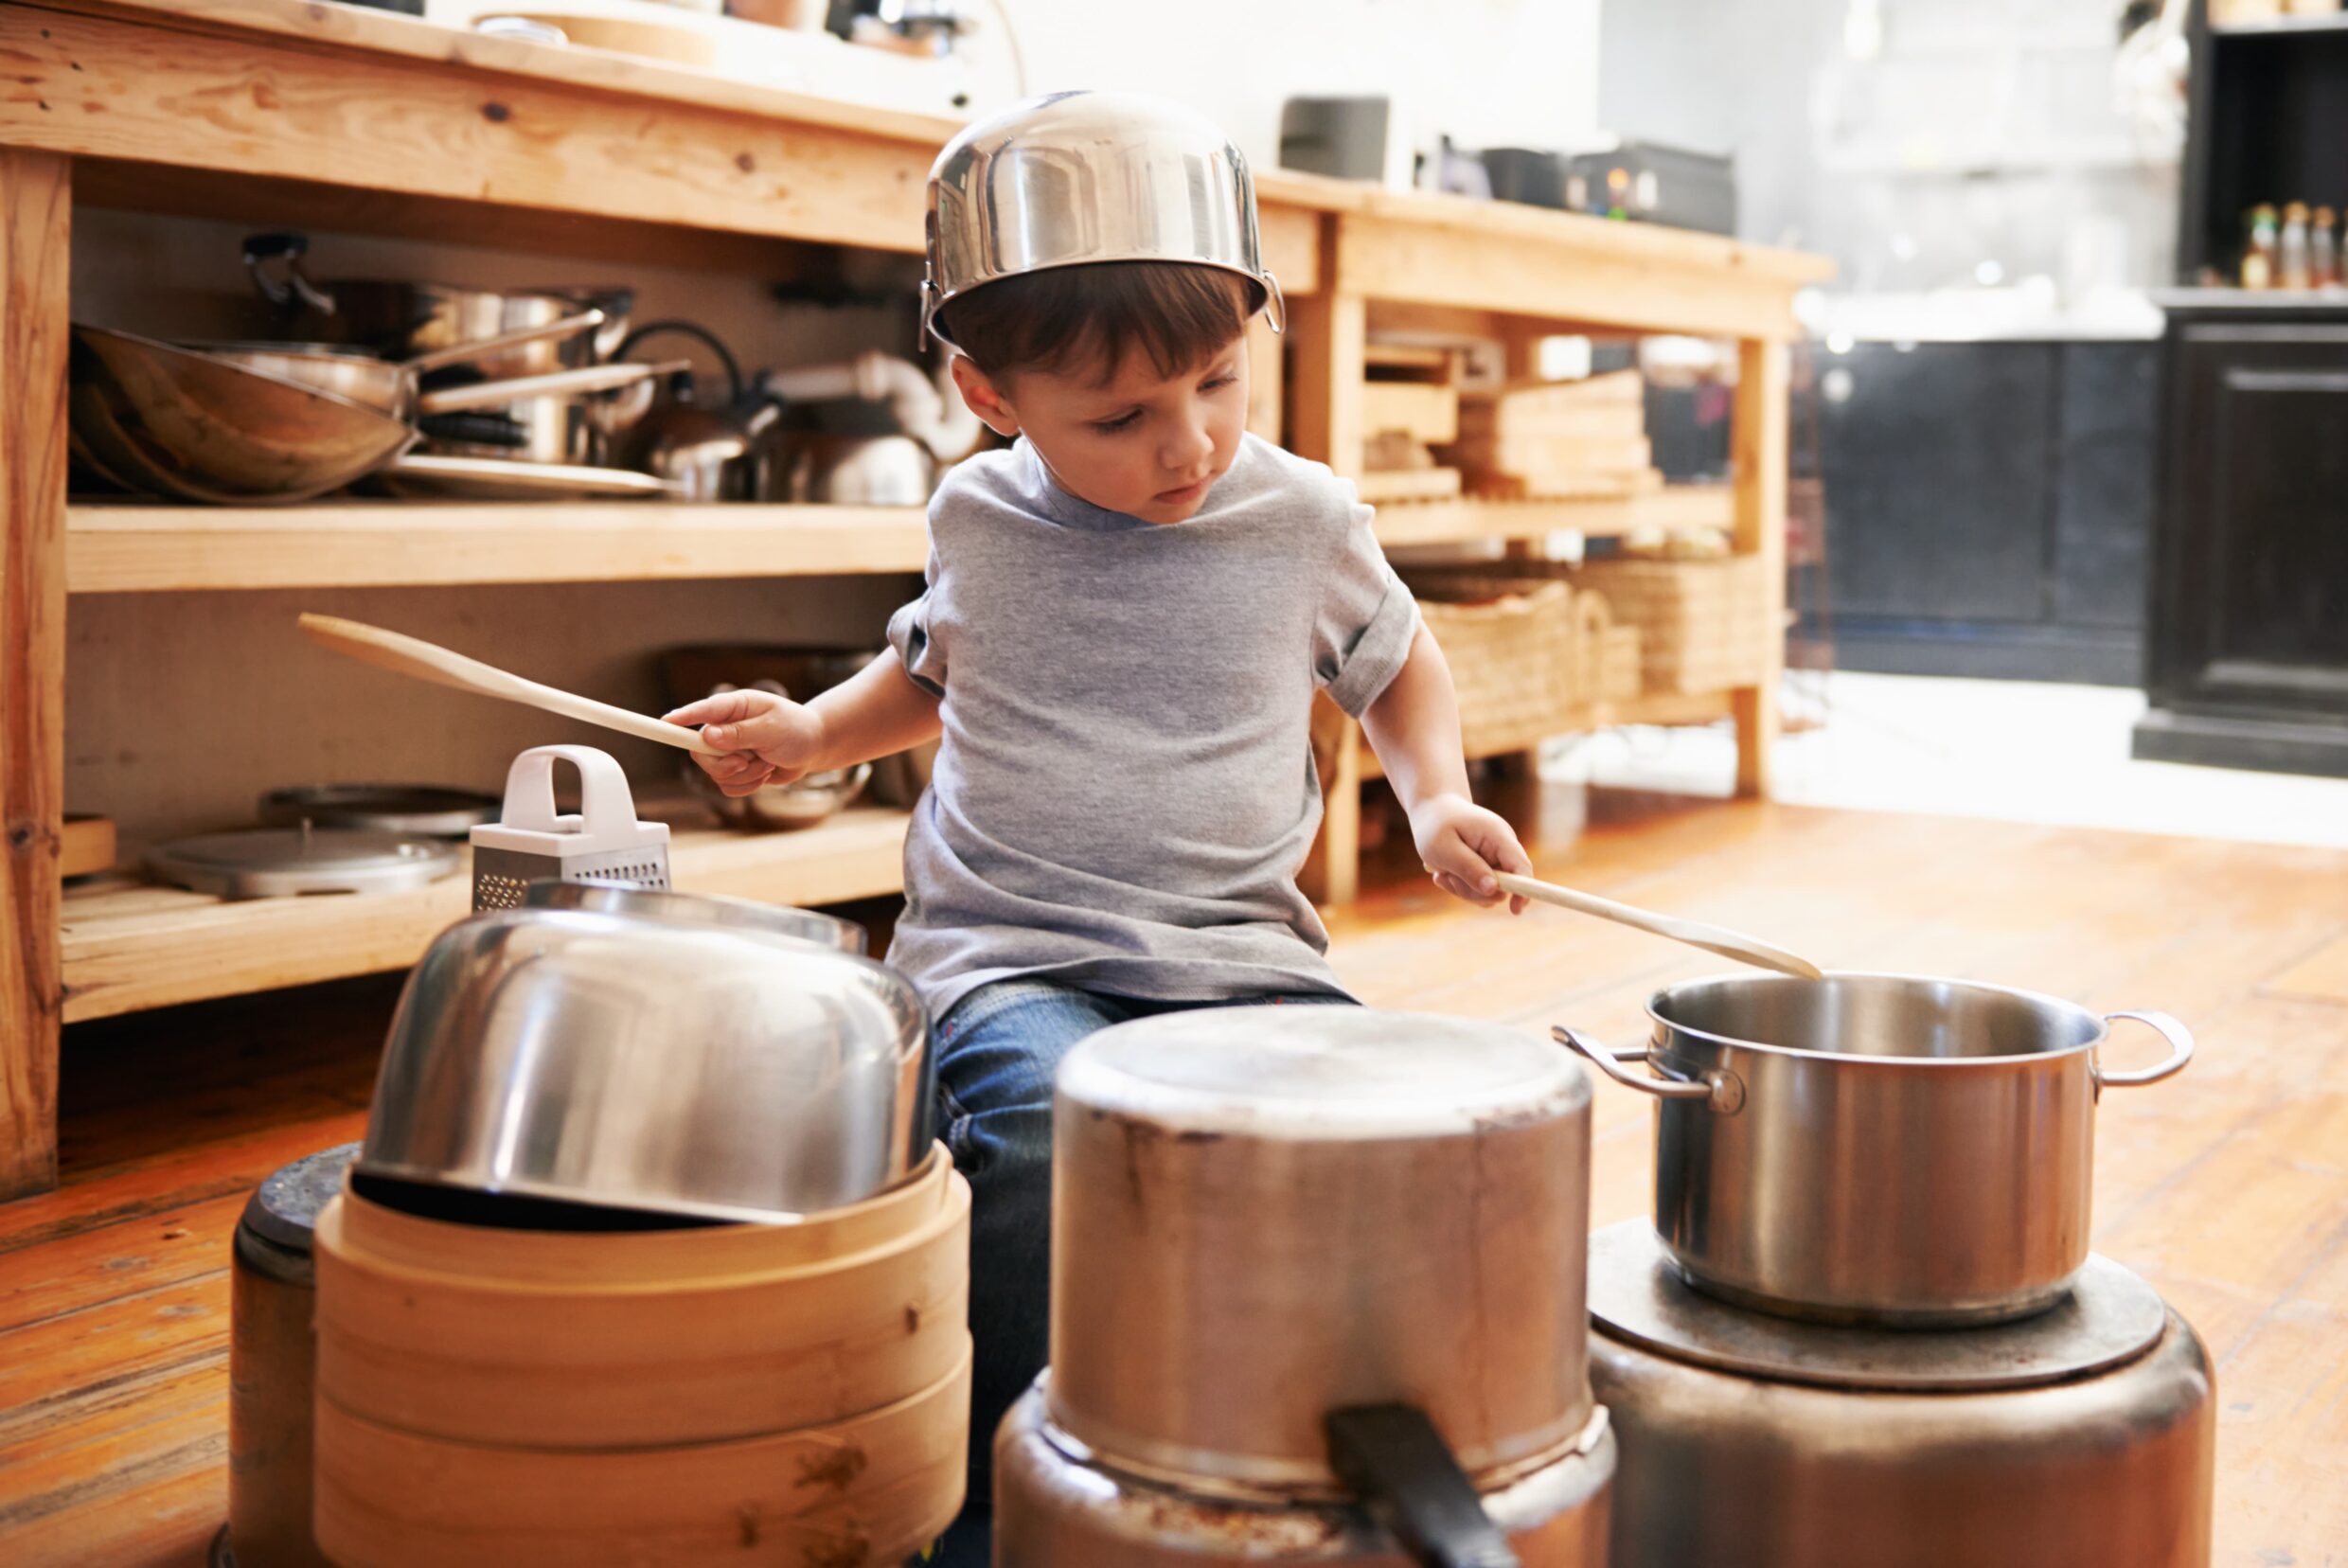 small boy on the floor playing pots and pans like drums